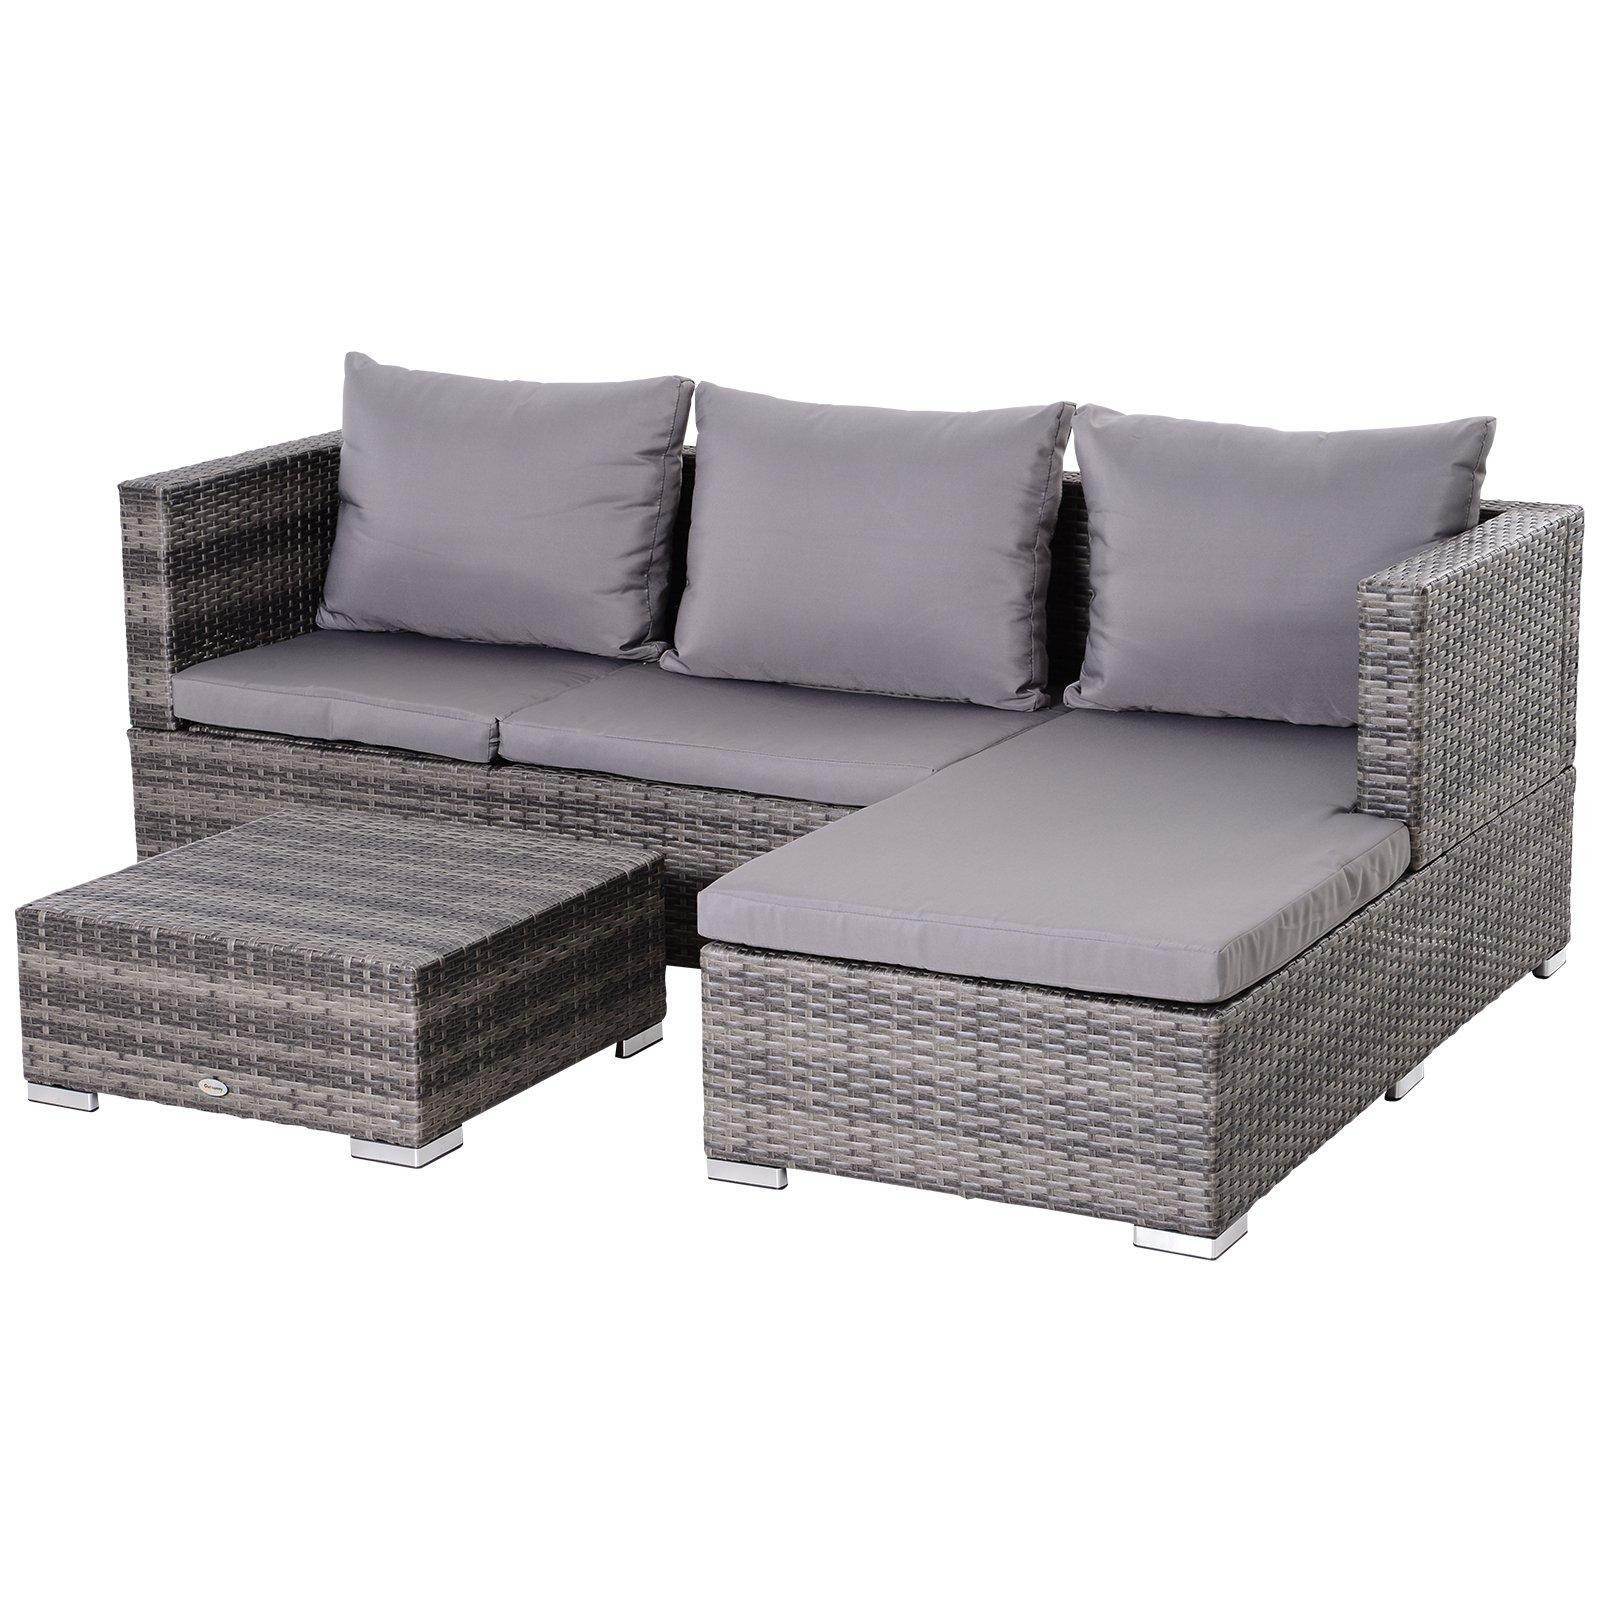 Rattan Garden Furniture Sofa Patio Conservatory Wicker withCushion 4-Seater - image 1